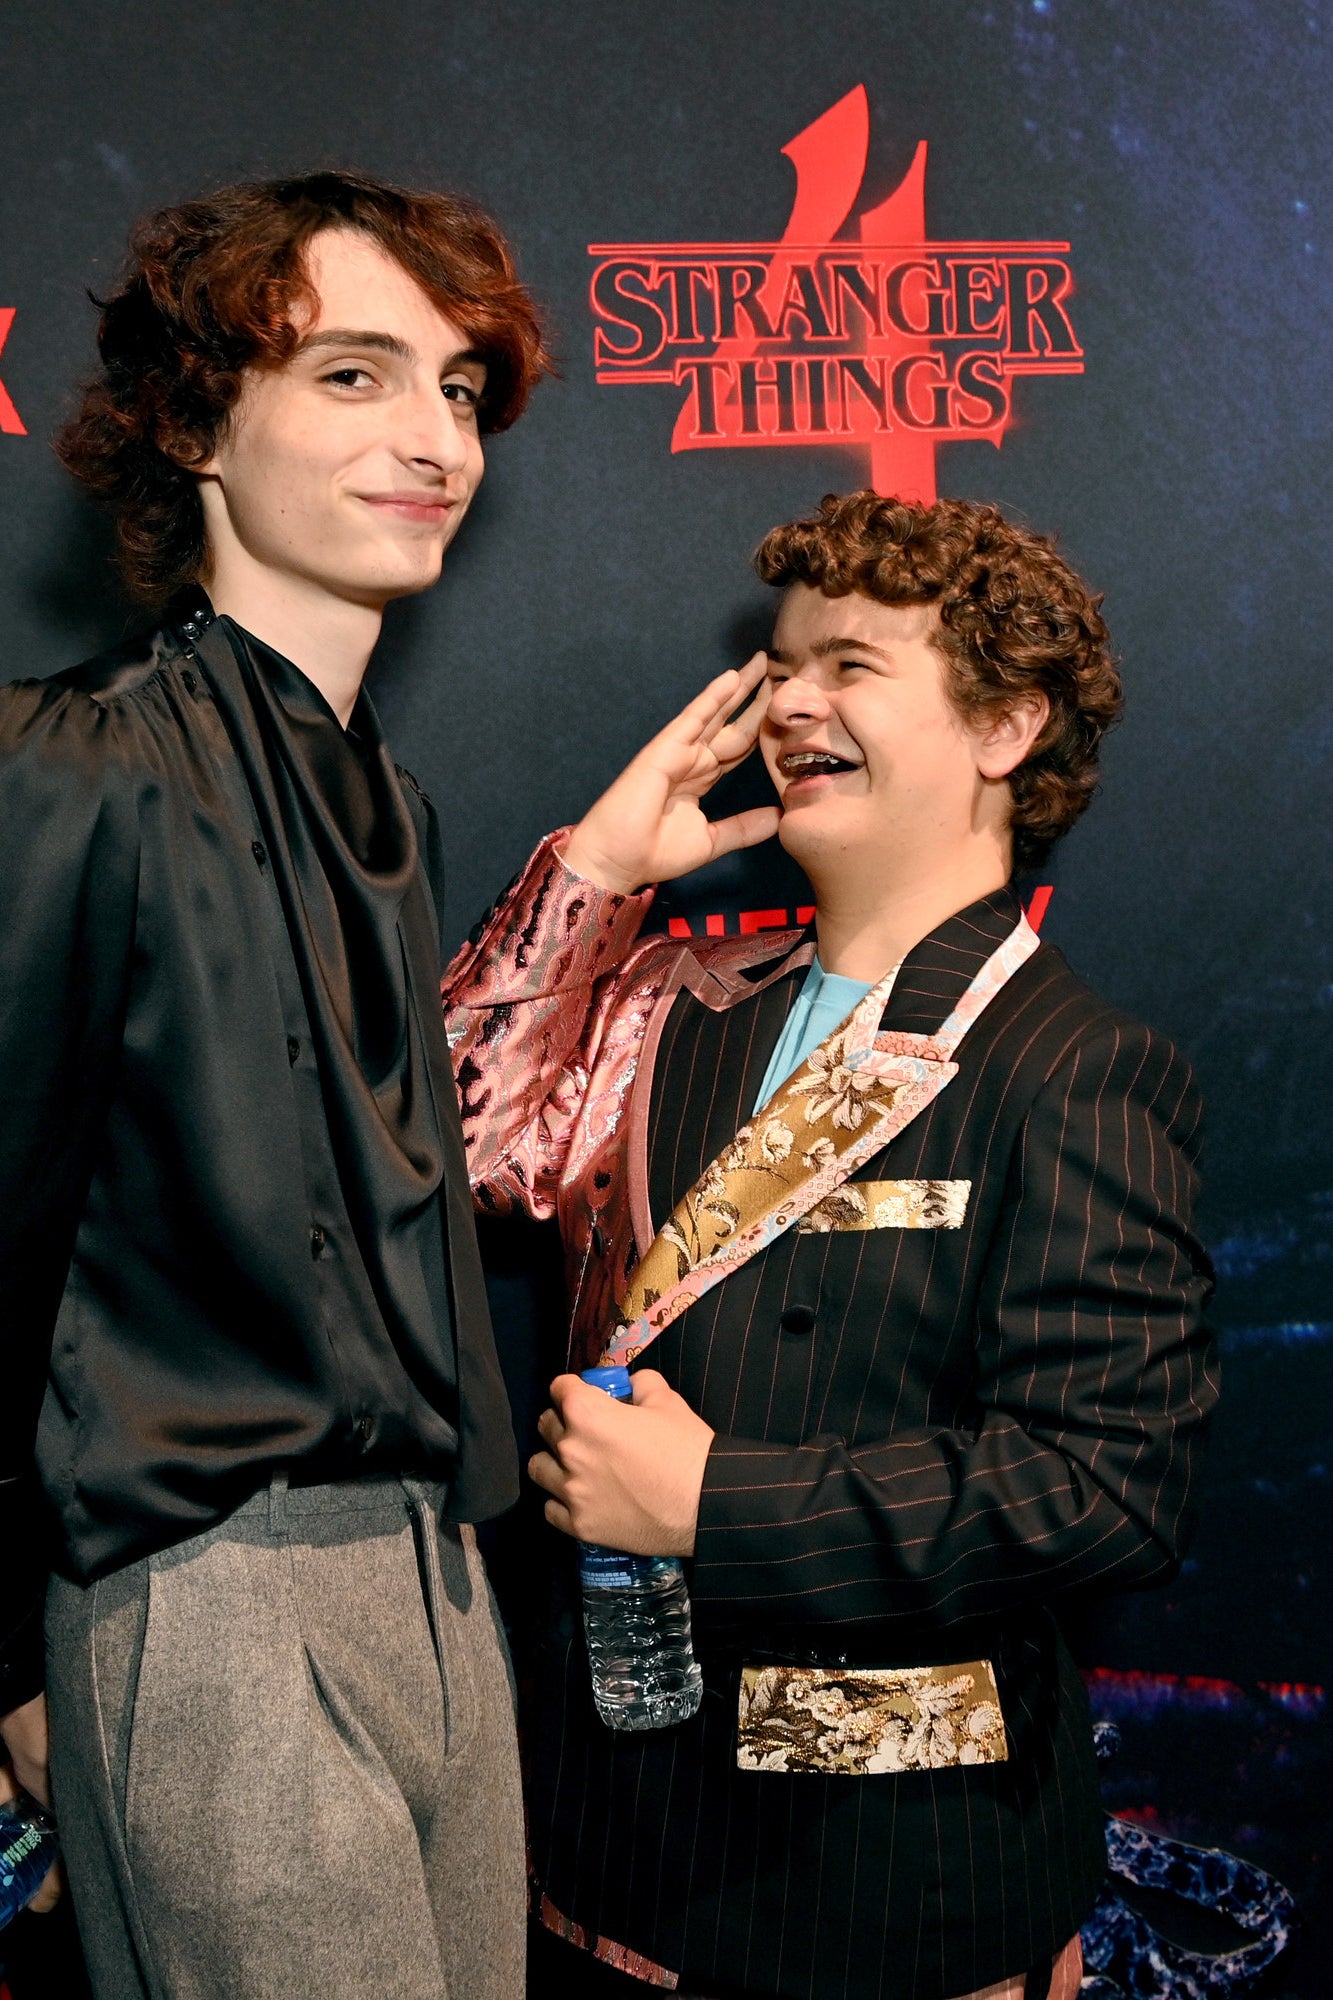 See the Stranger Things Cast at the Season 4 Premiere